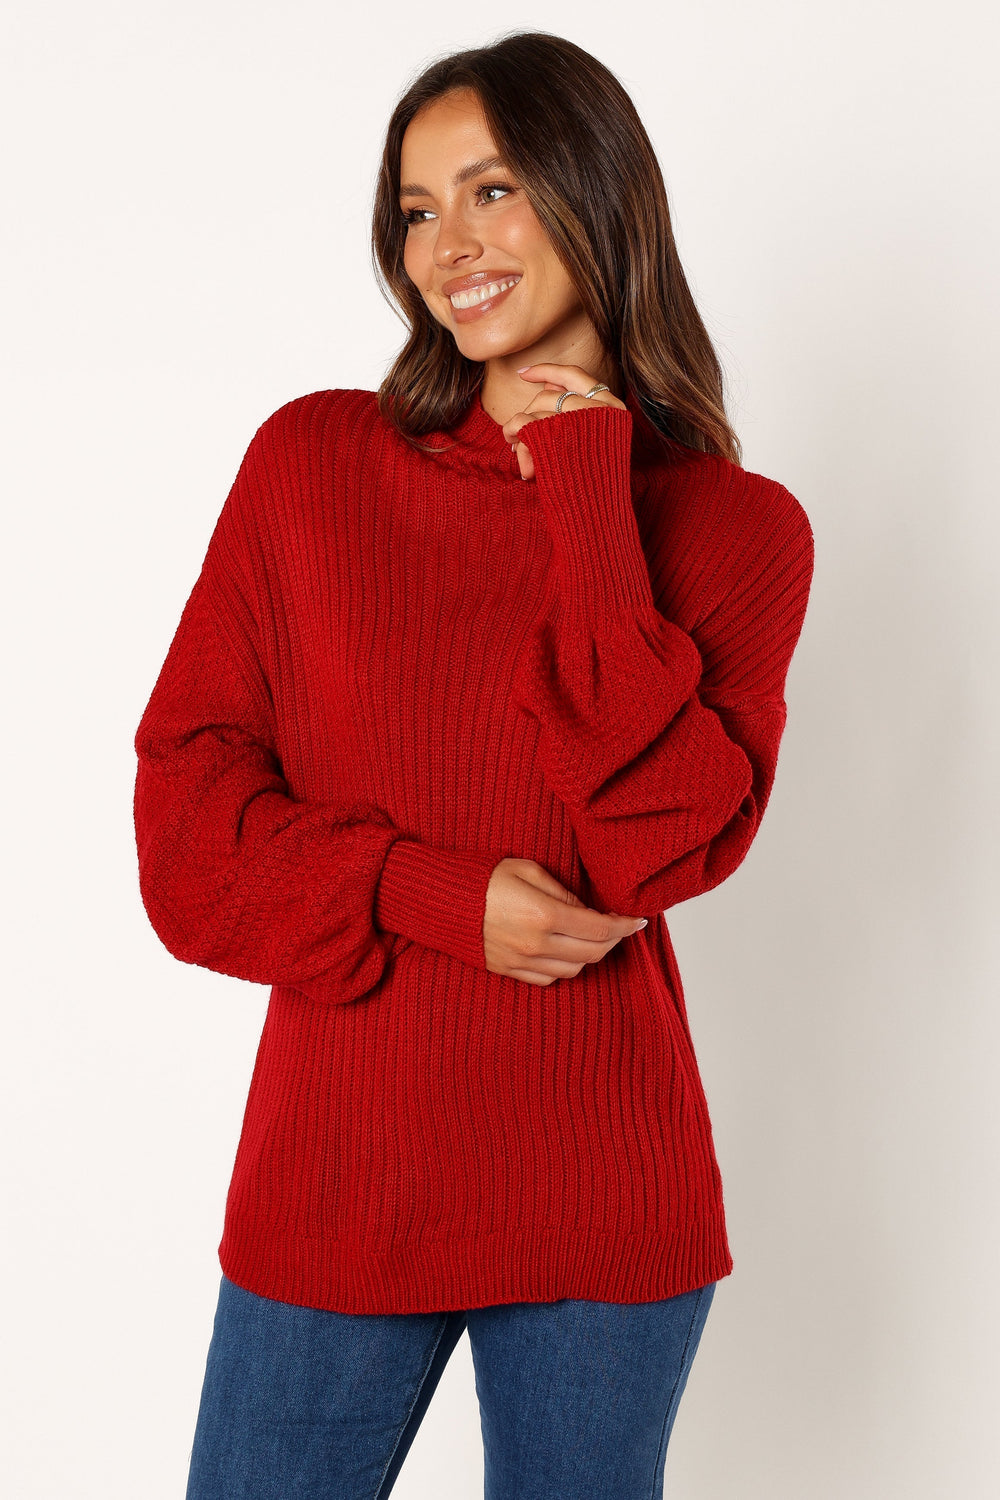 Petal and Pup USA KNITWEAR Lorelei Textured Sleeve Knit Sweater - Red